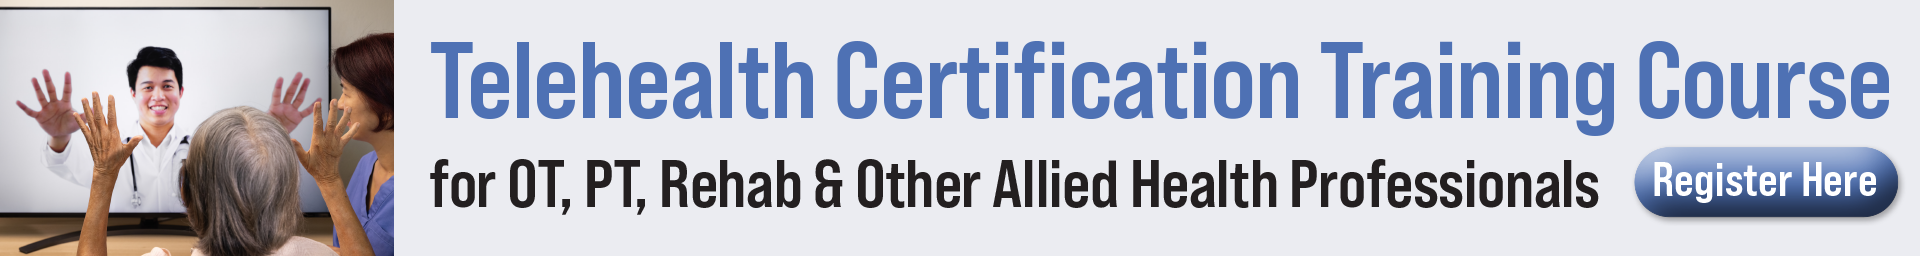 Telehealth Certification Training Course for Allied Health Professionals